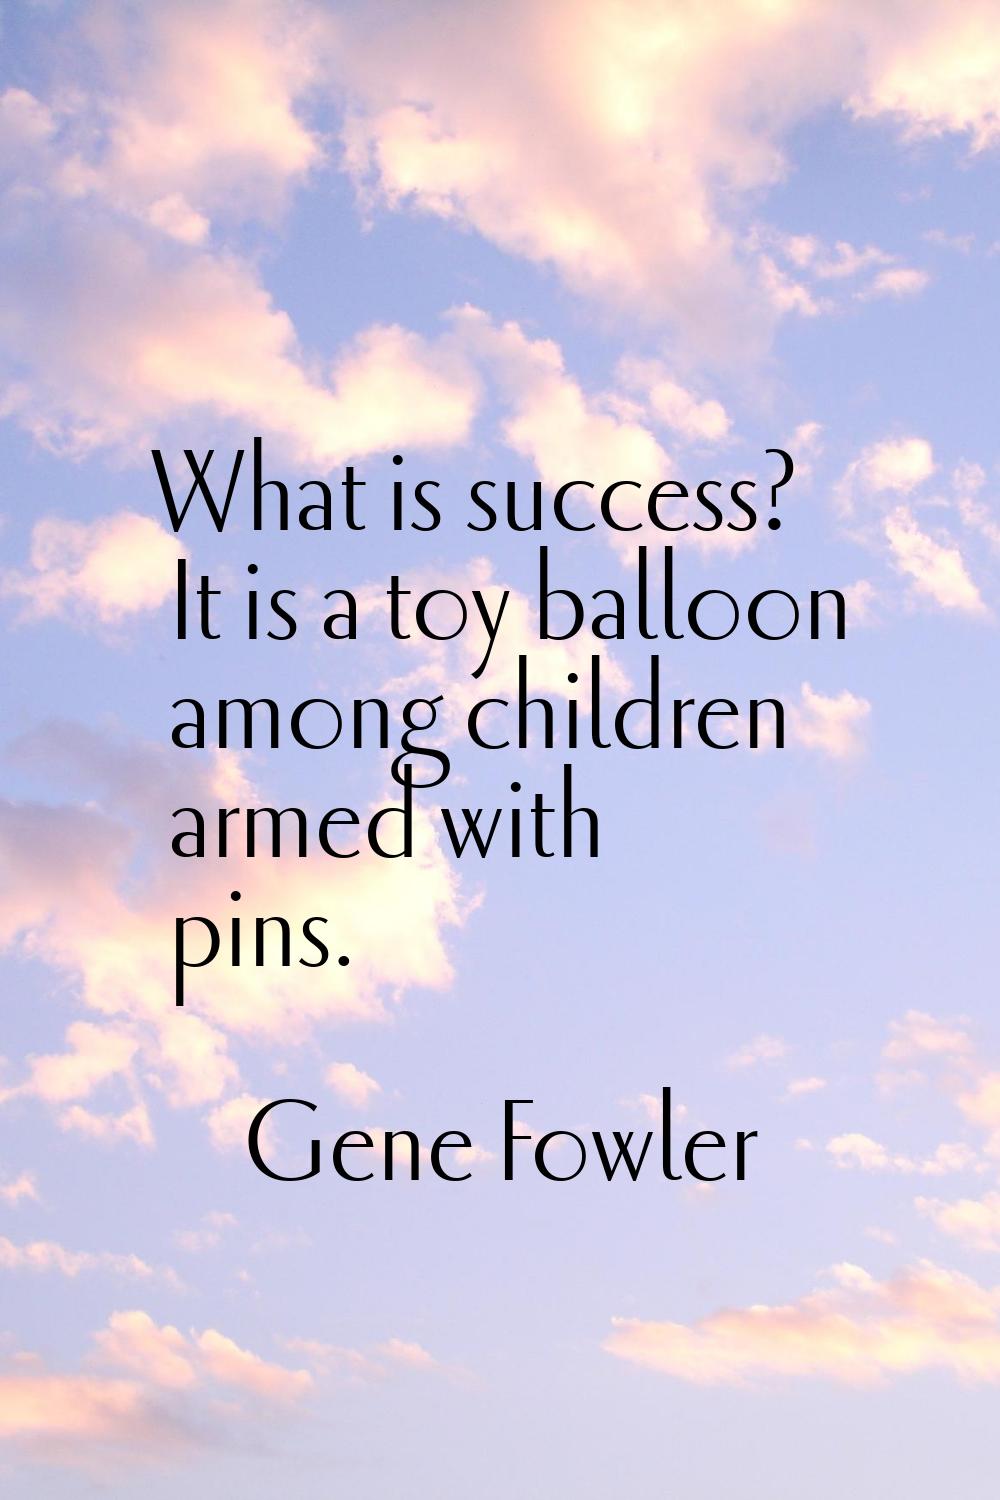 What is success? It is a toy balloon among children armed with pins.